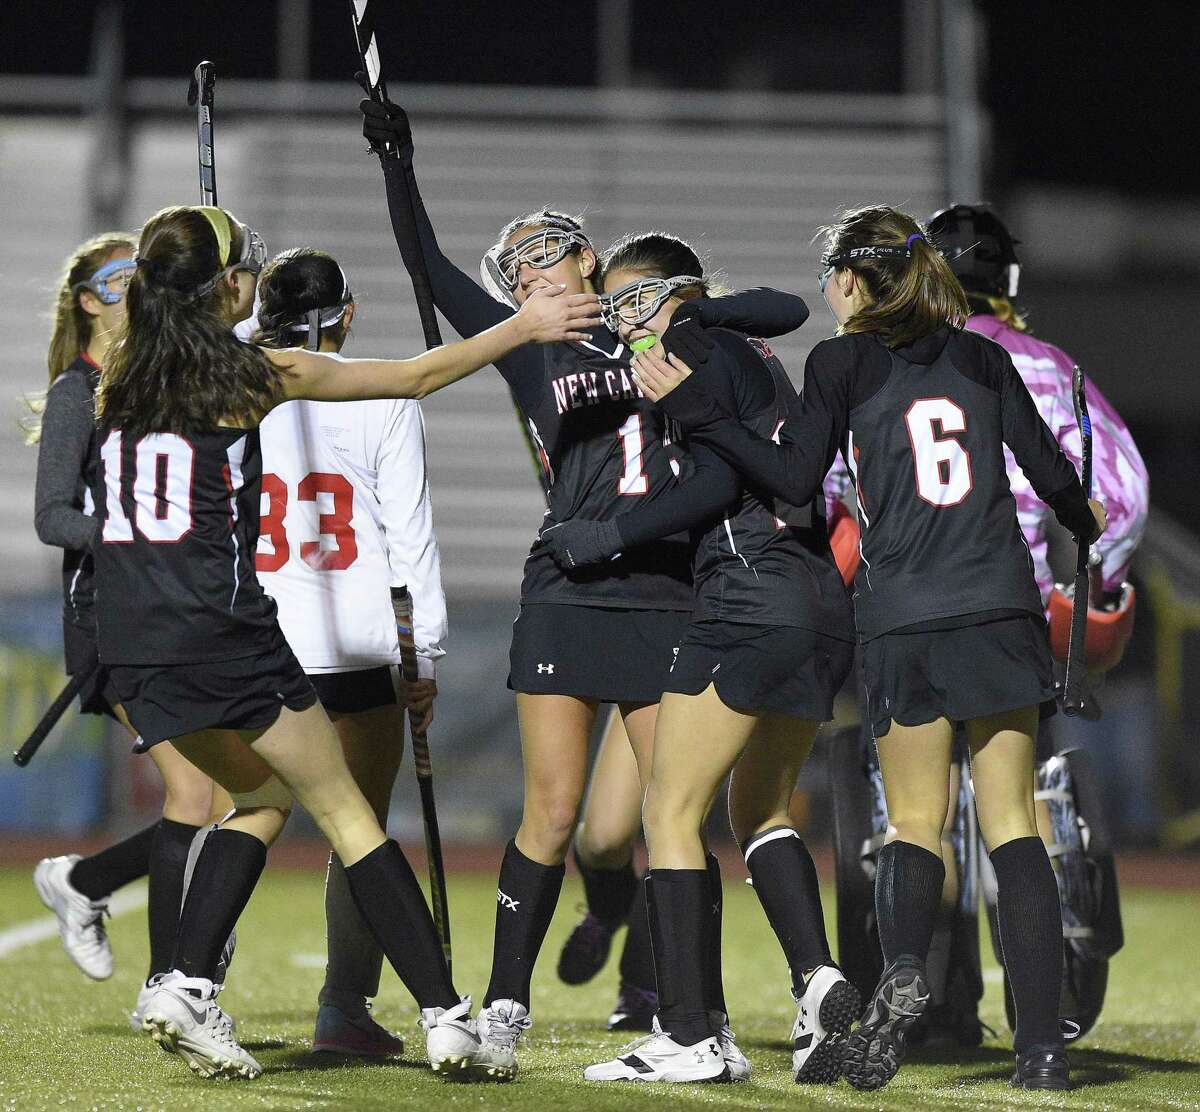 New Canaan Marlee Smith (25), center, is mugged by her teammates as they celebrate her goal against Branford goalie Erica Klarman (83) in a CIAC 2017 State Field Hockey Tournament Class M semifinal game at Trumbull High School in Trumbull, Connecticut on Tuesday, Nov. 14, 2017. New Canaan defeated Branford 2-1.